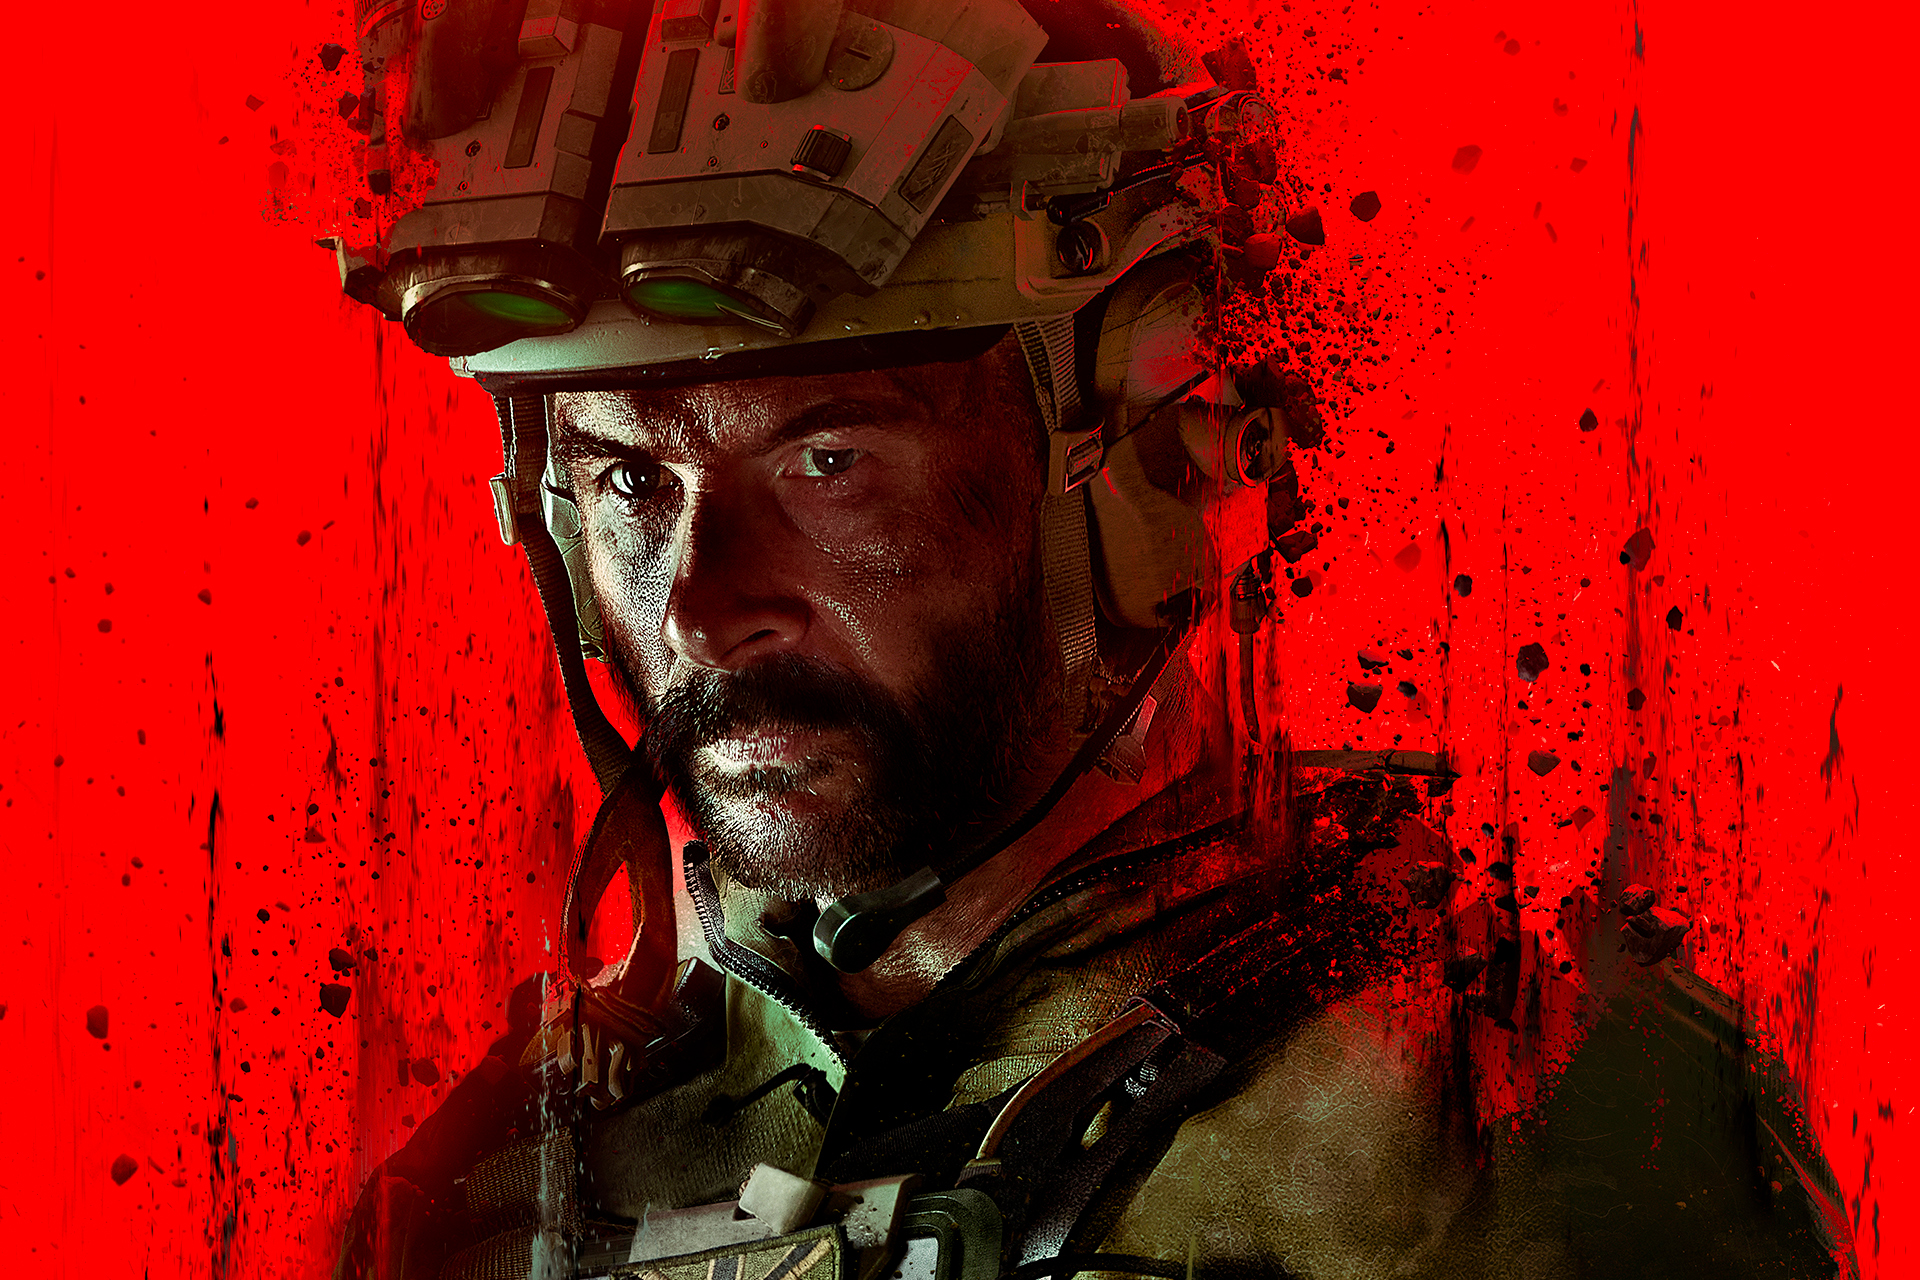 Artwork of Captain Price from Call of Duty: Modern Warfare 3